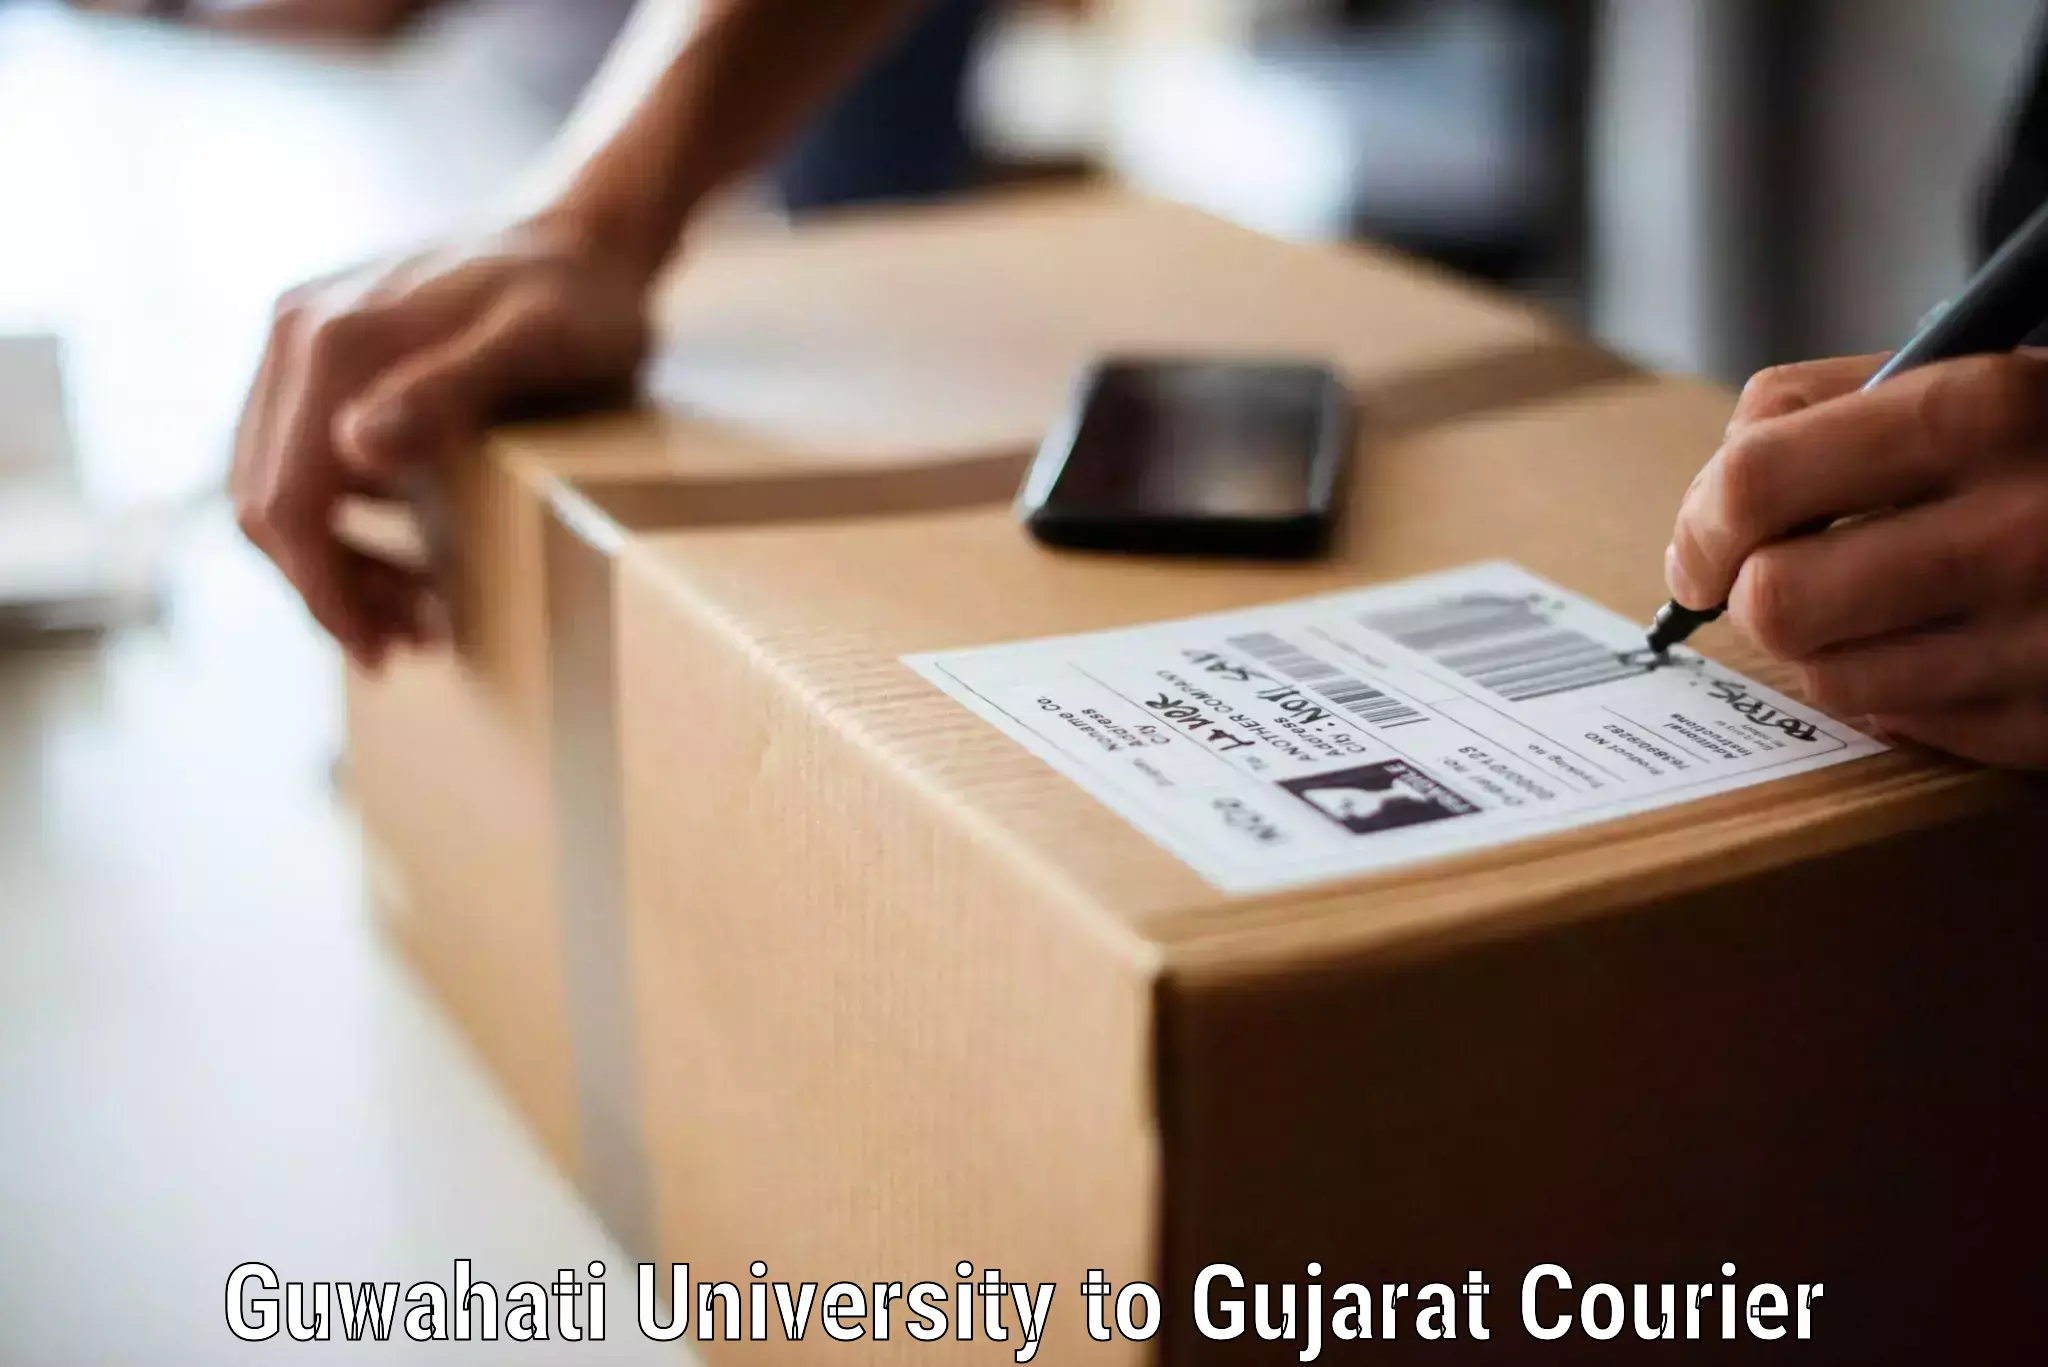 Reliable relocation services Guwahati University to Dholera